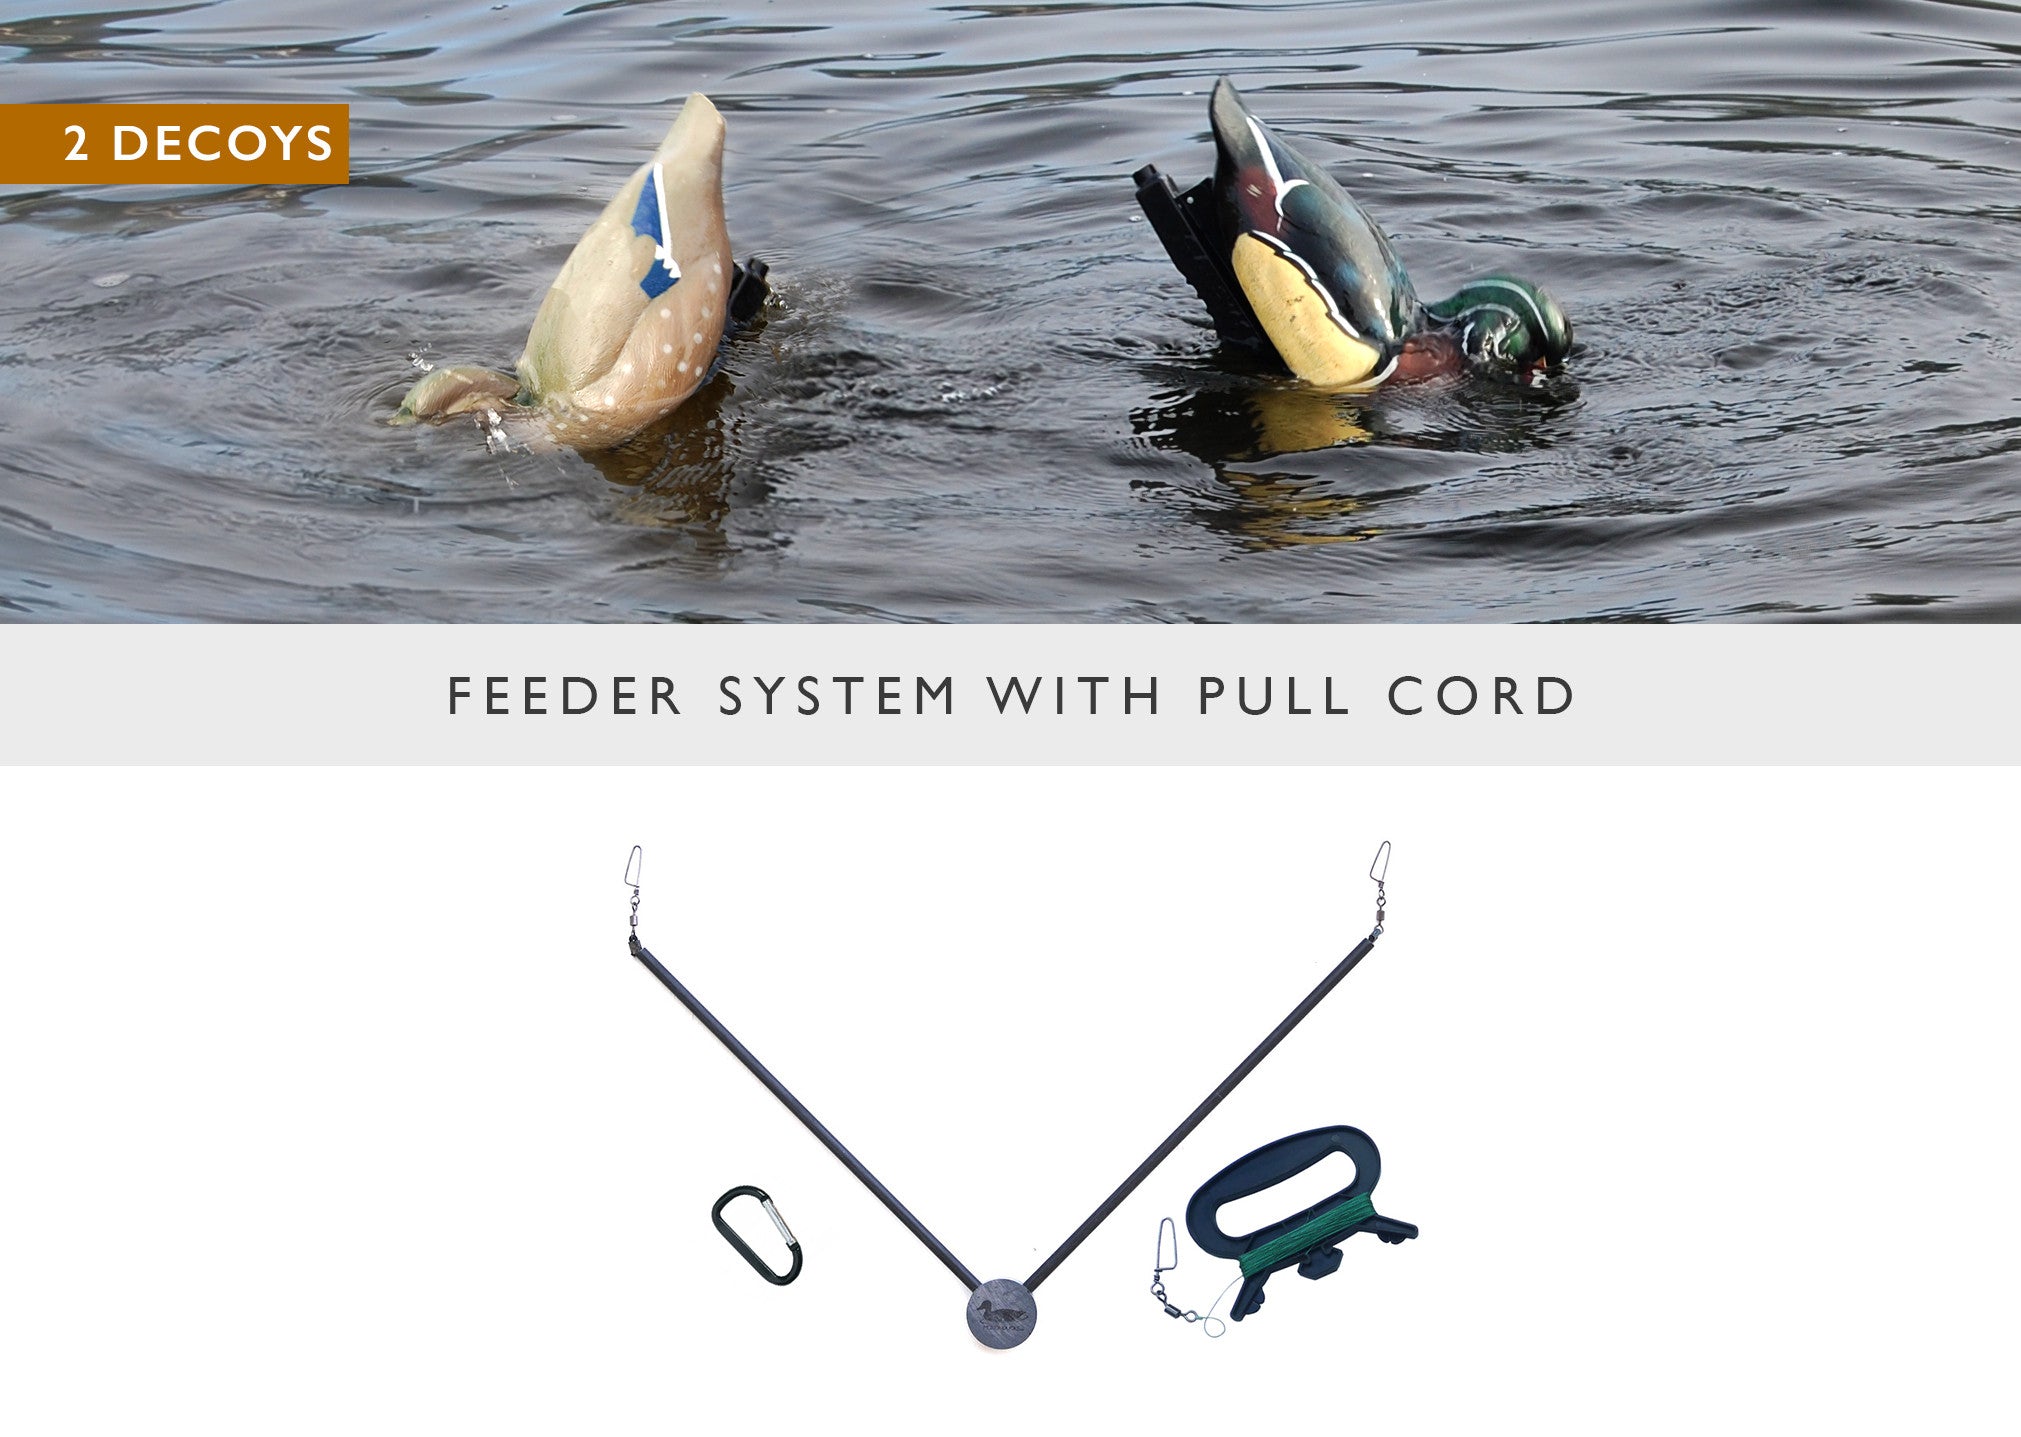 Bungee / Shock Cord For Jerk System 4.5 Feet with Clip. - Motion Ducks, LLC